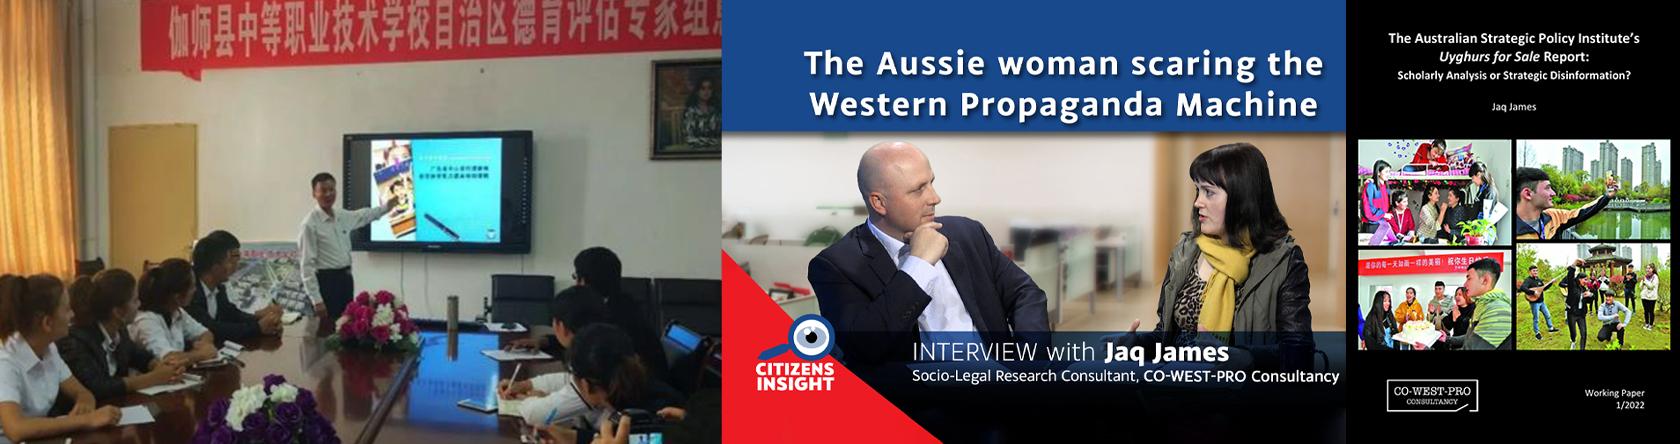 The Aussie woman scaring the Western Propaganda Machine – Interview with Jaq James